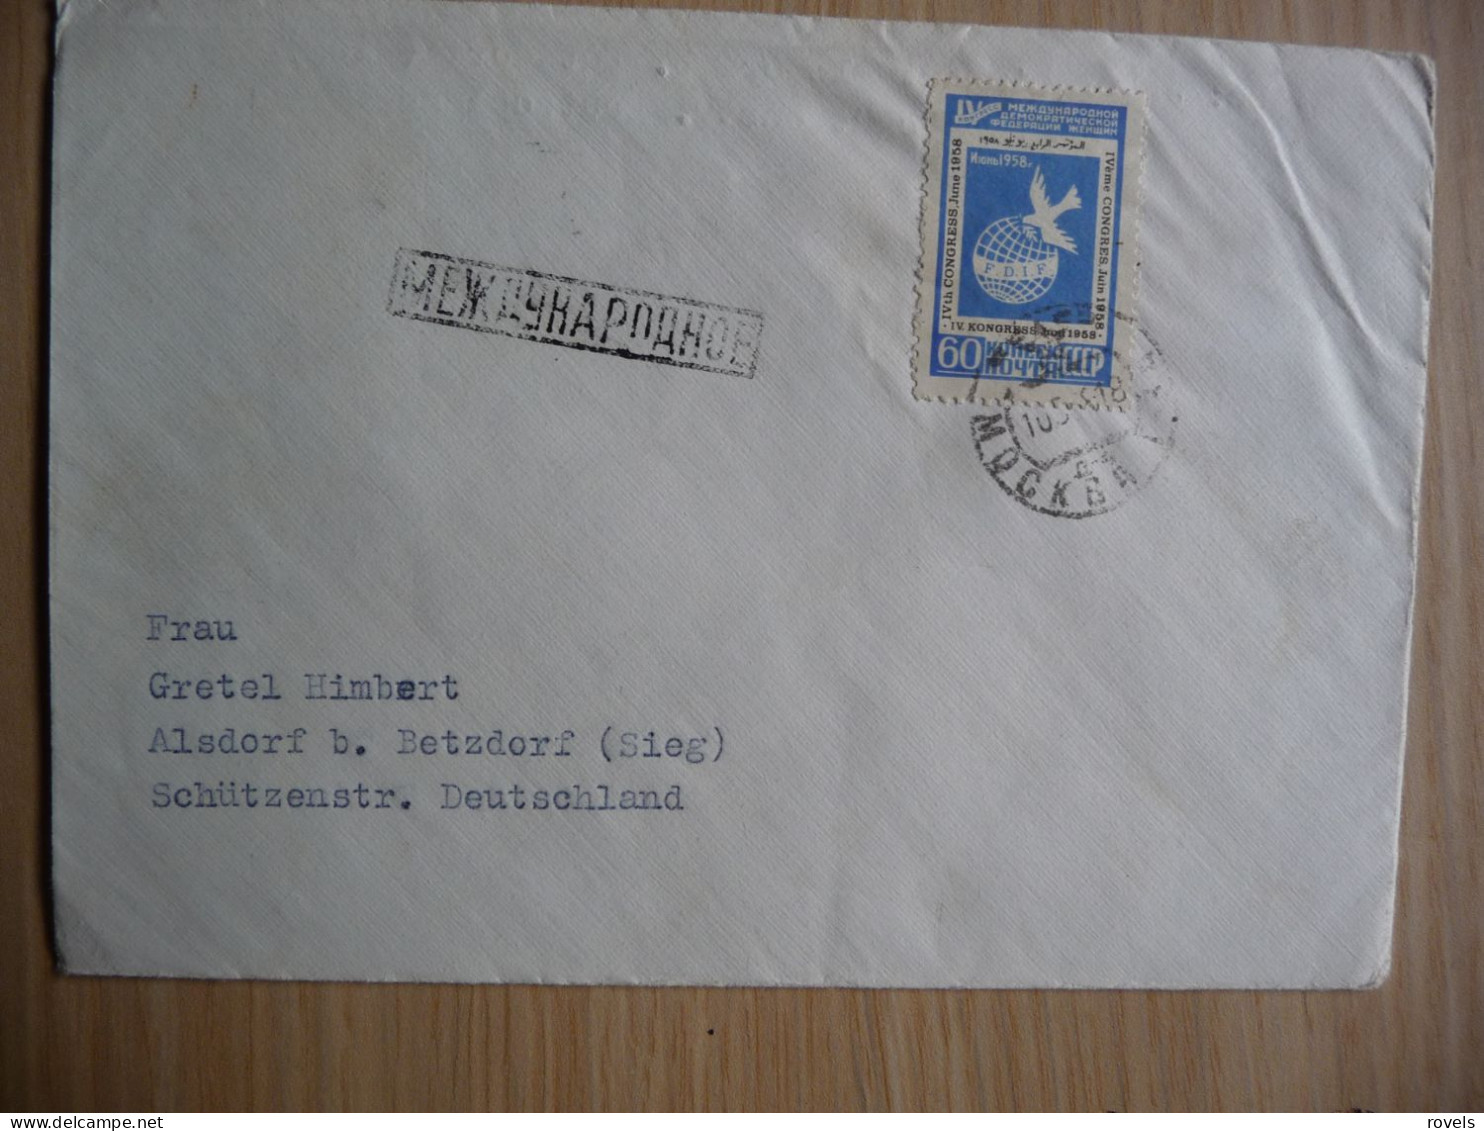 (8) RUSIA , CCCP, CONGRESS 1958 COVER SENT TO DUITSLAND. - Covers & Documents